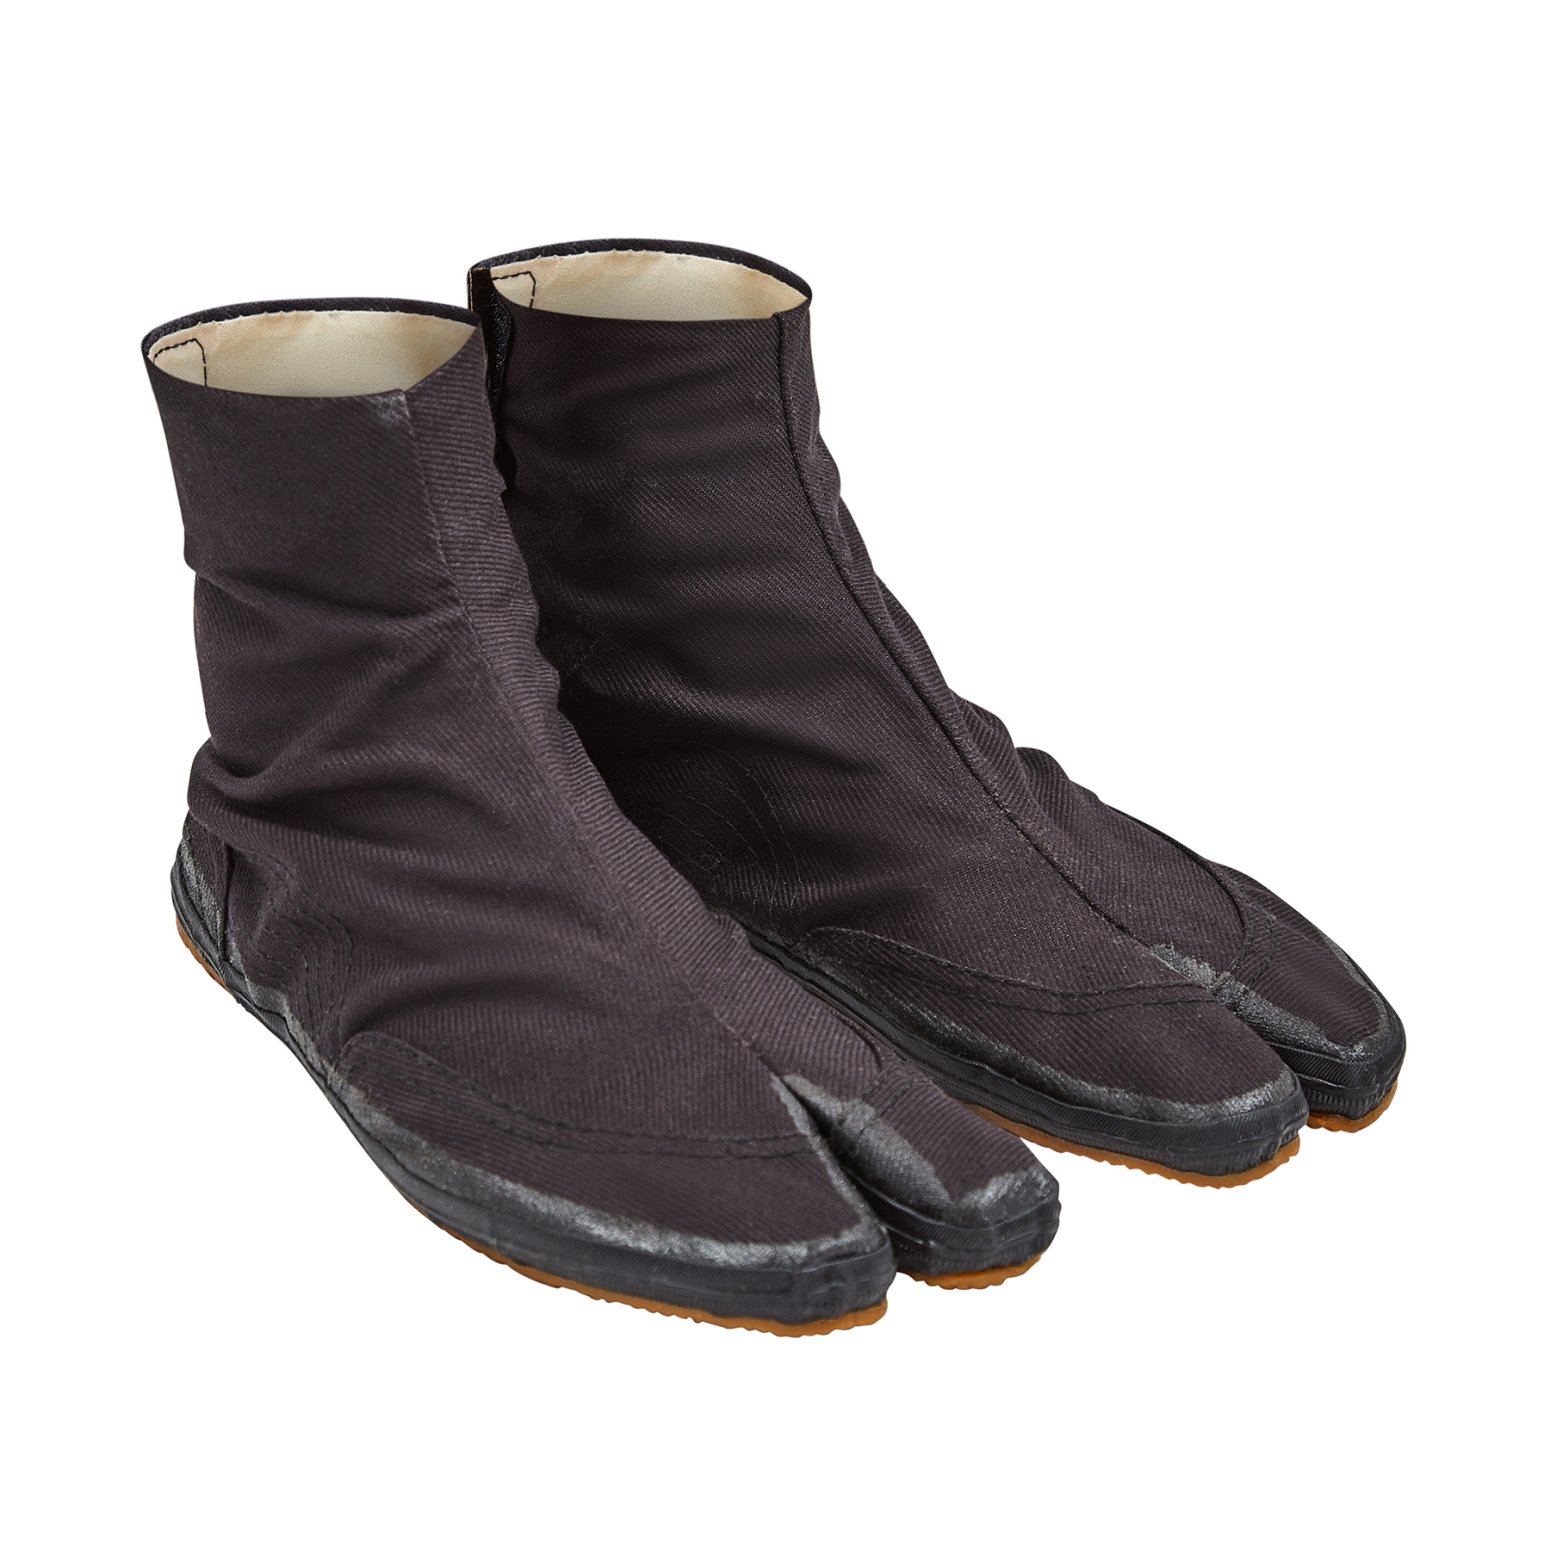 Ninja Tabi Boots: Ankle Length - Click Image to Close